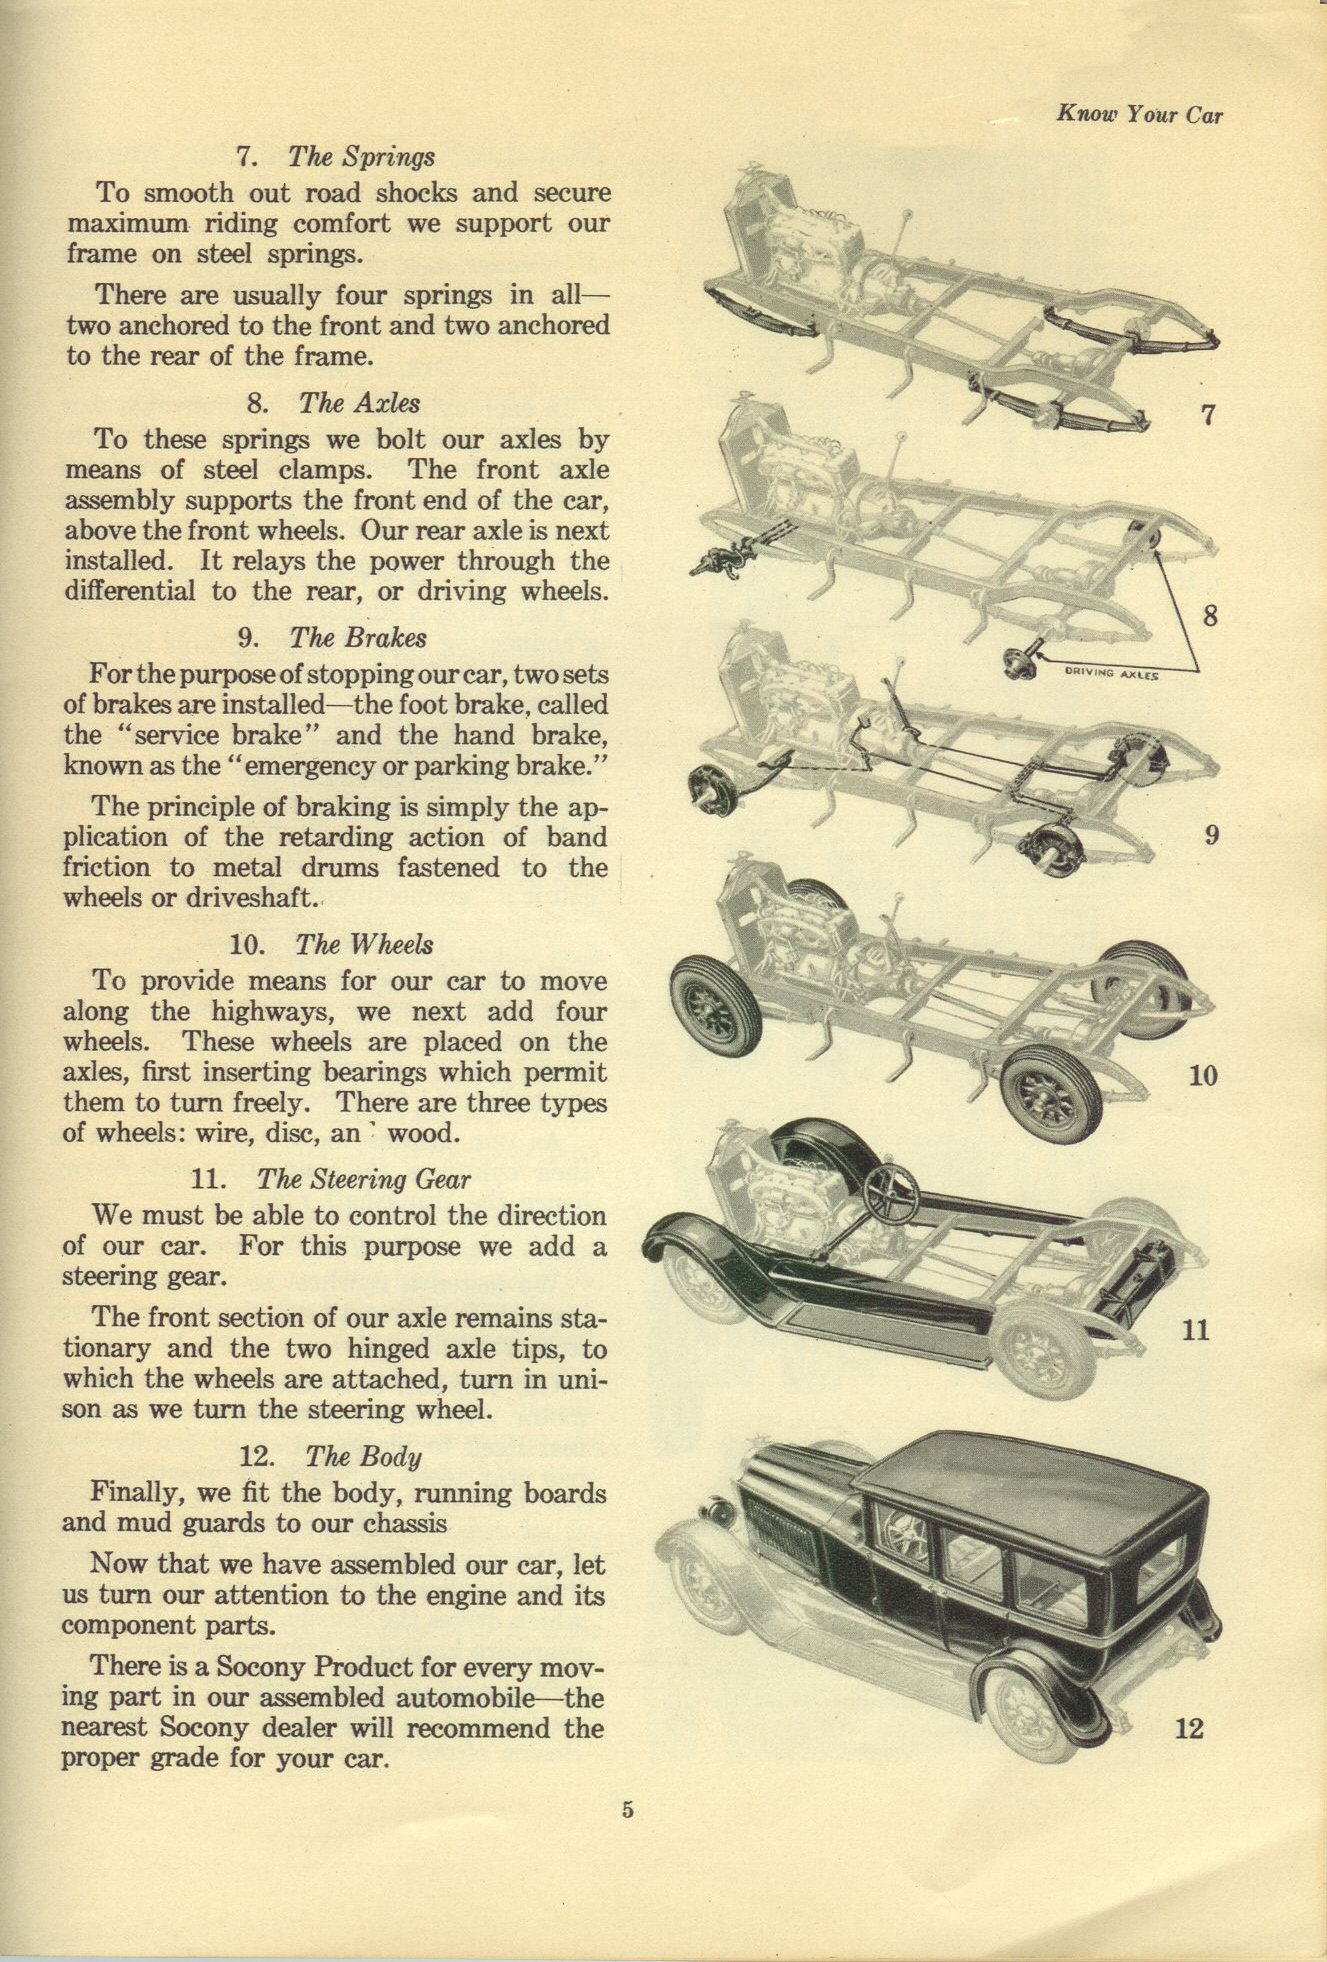 1928_Know_Your_Car-05